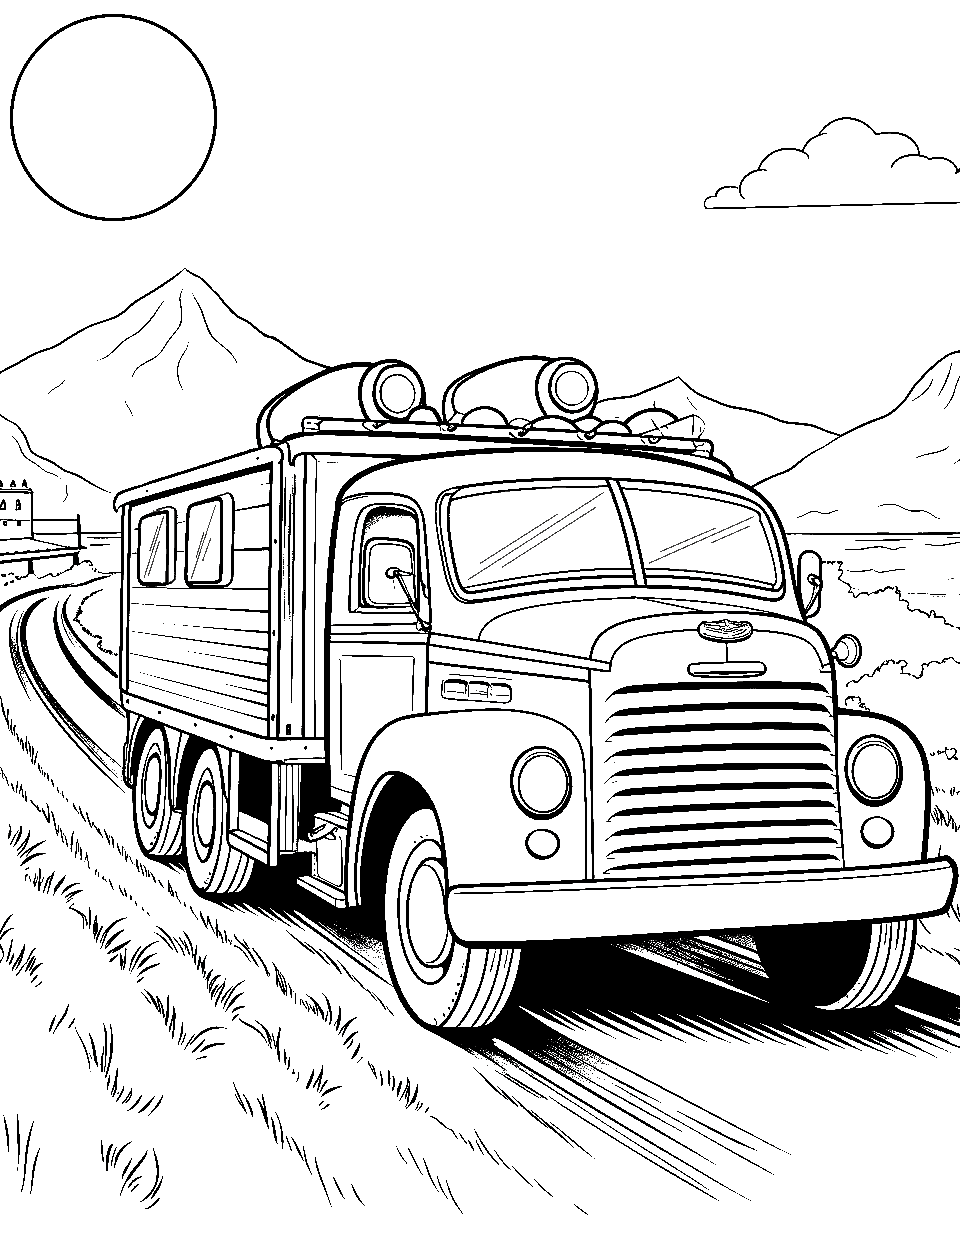 Summer Road Trip Coloring Page - A truck with luggage on top, driving along a coastal road under a sunny summer sky.